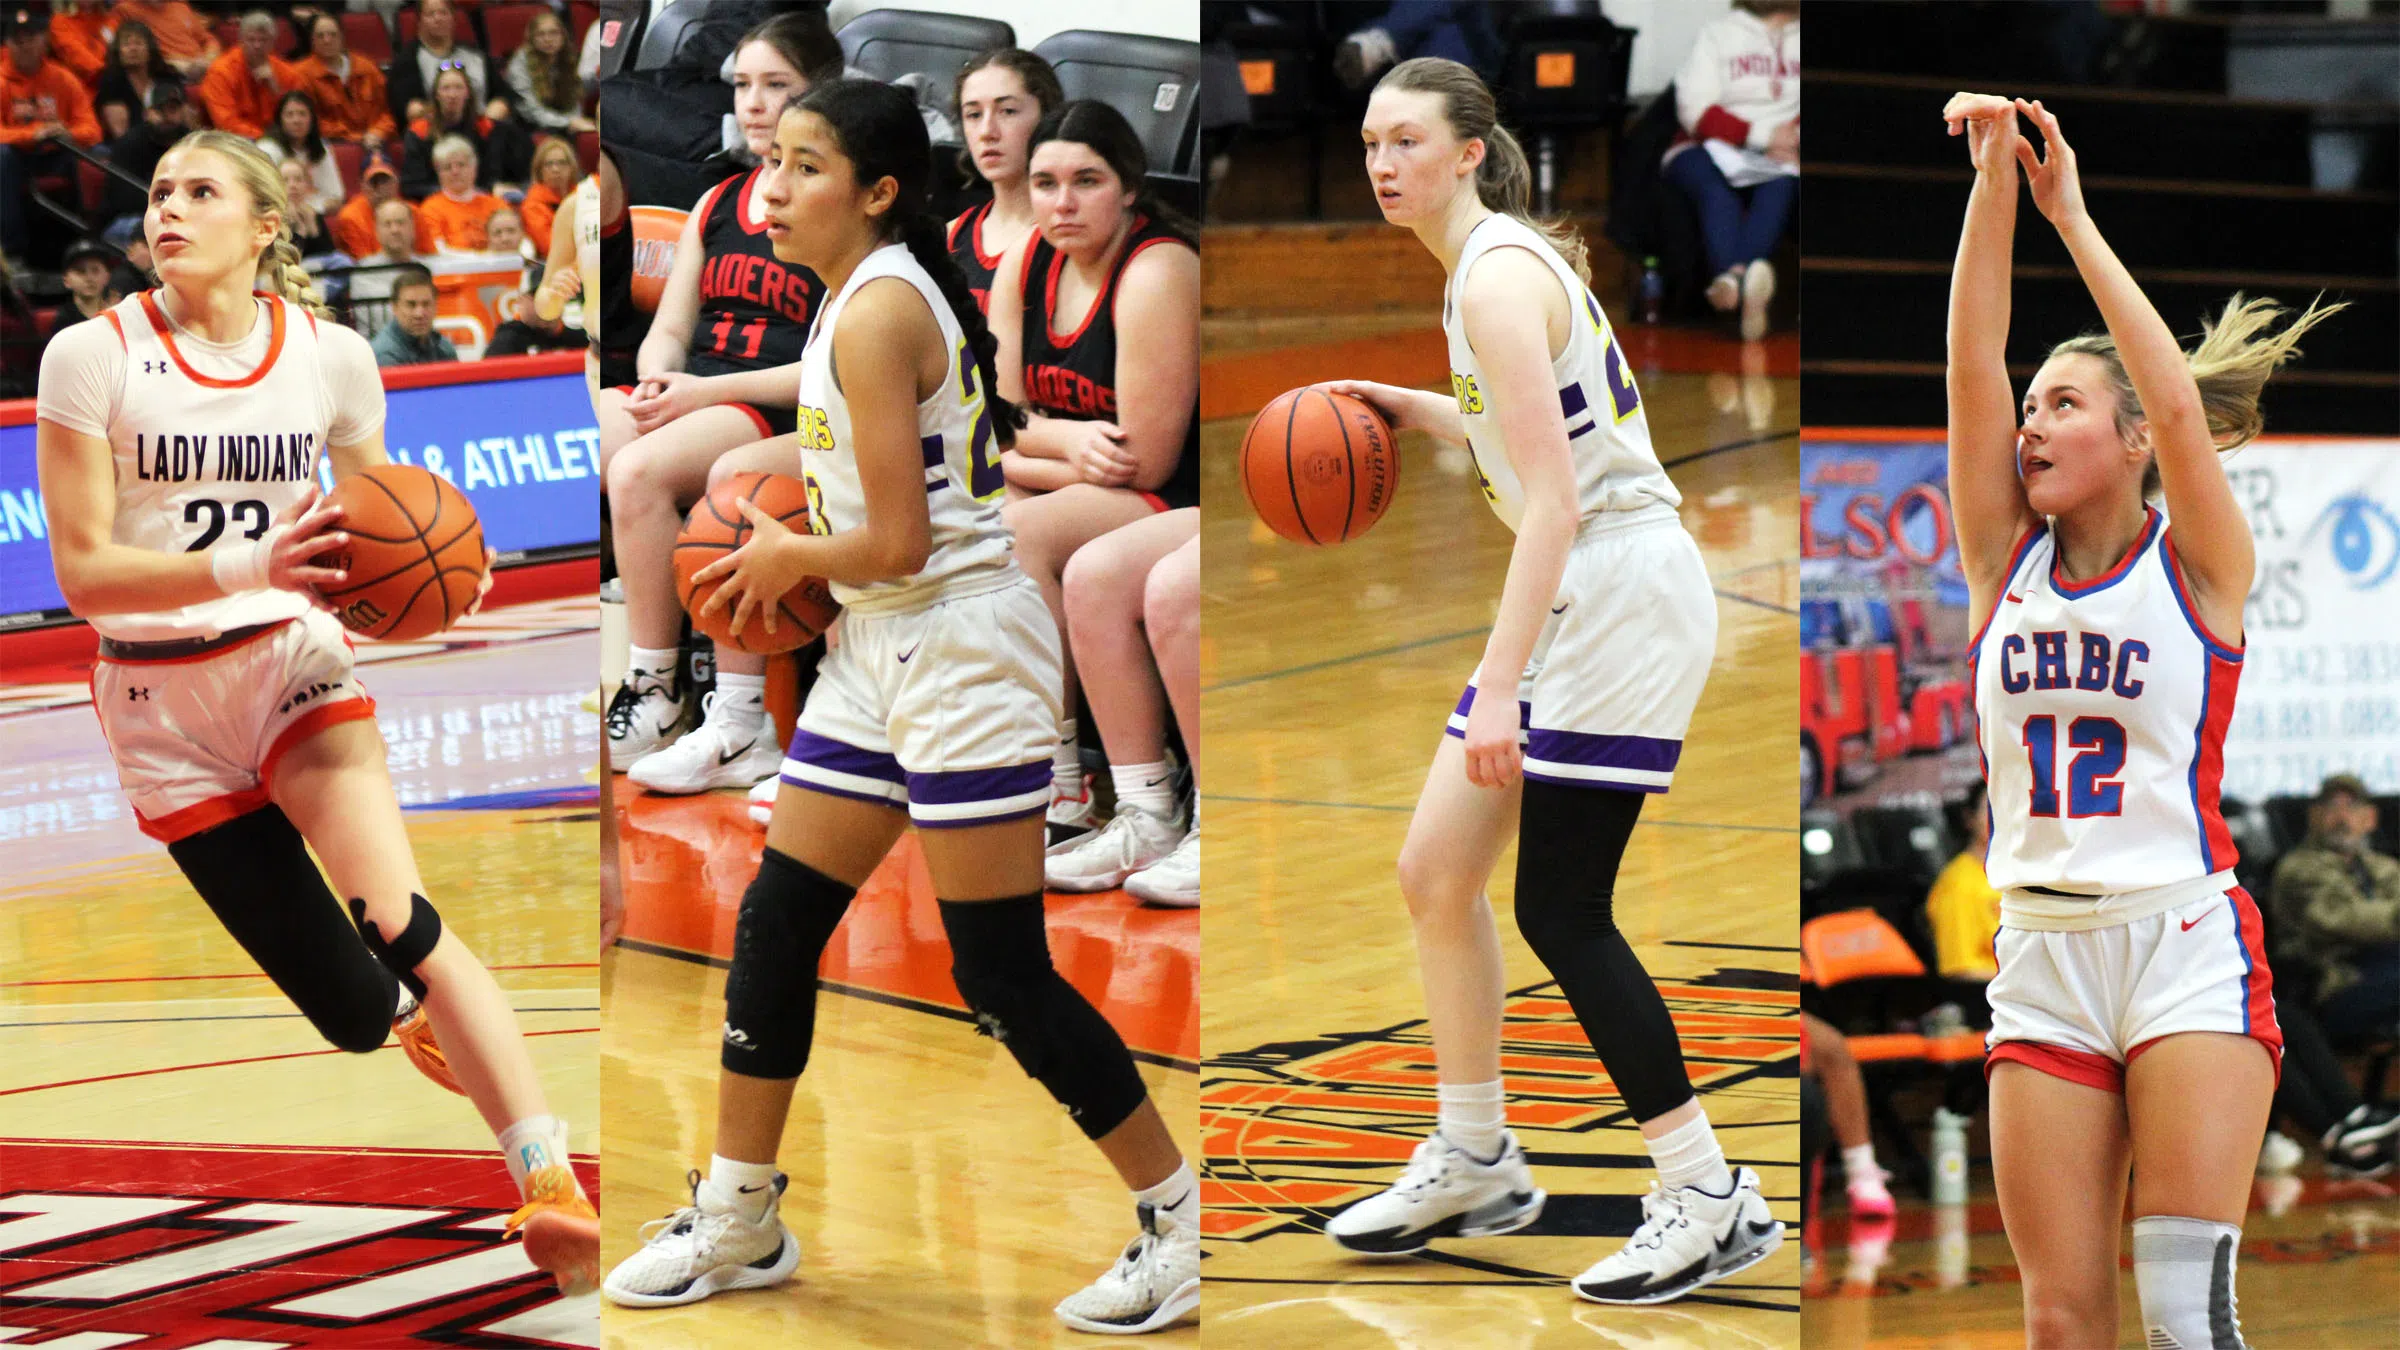 Nelson, Haslett, Seabaugh and Rodman All Named to IBCA All-State